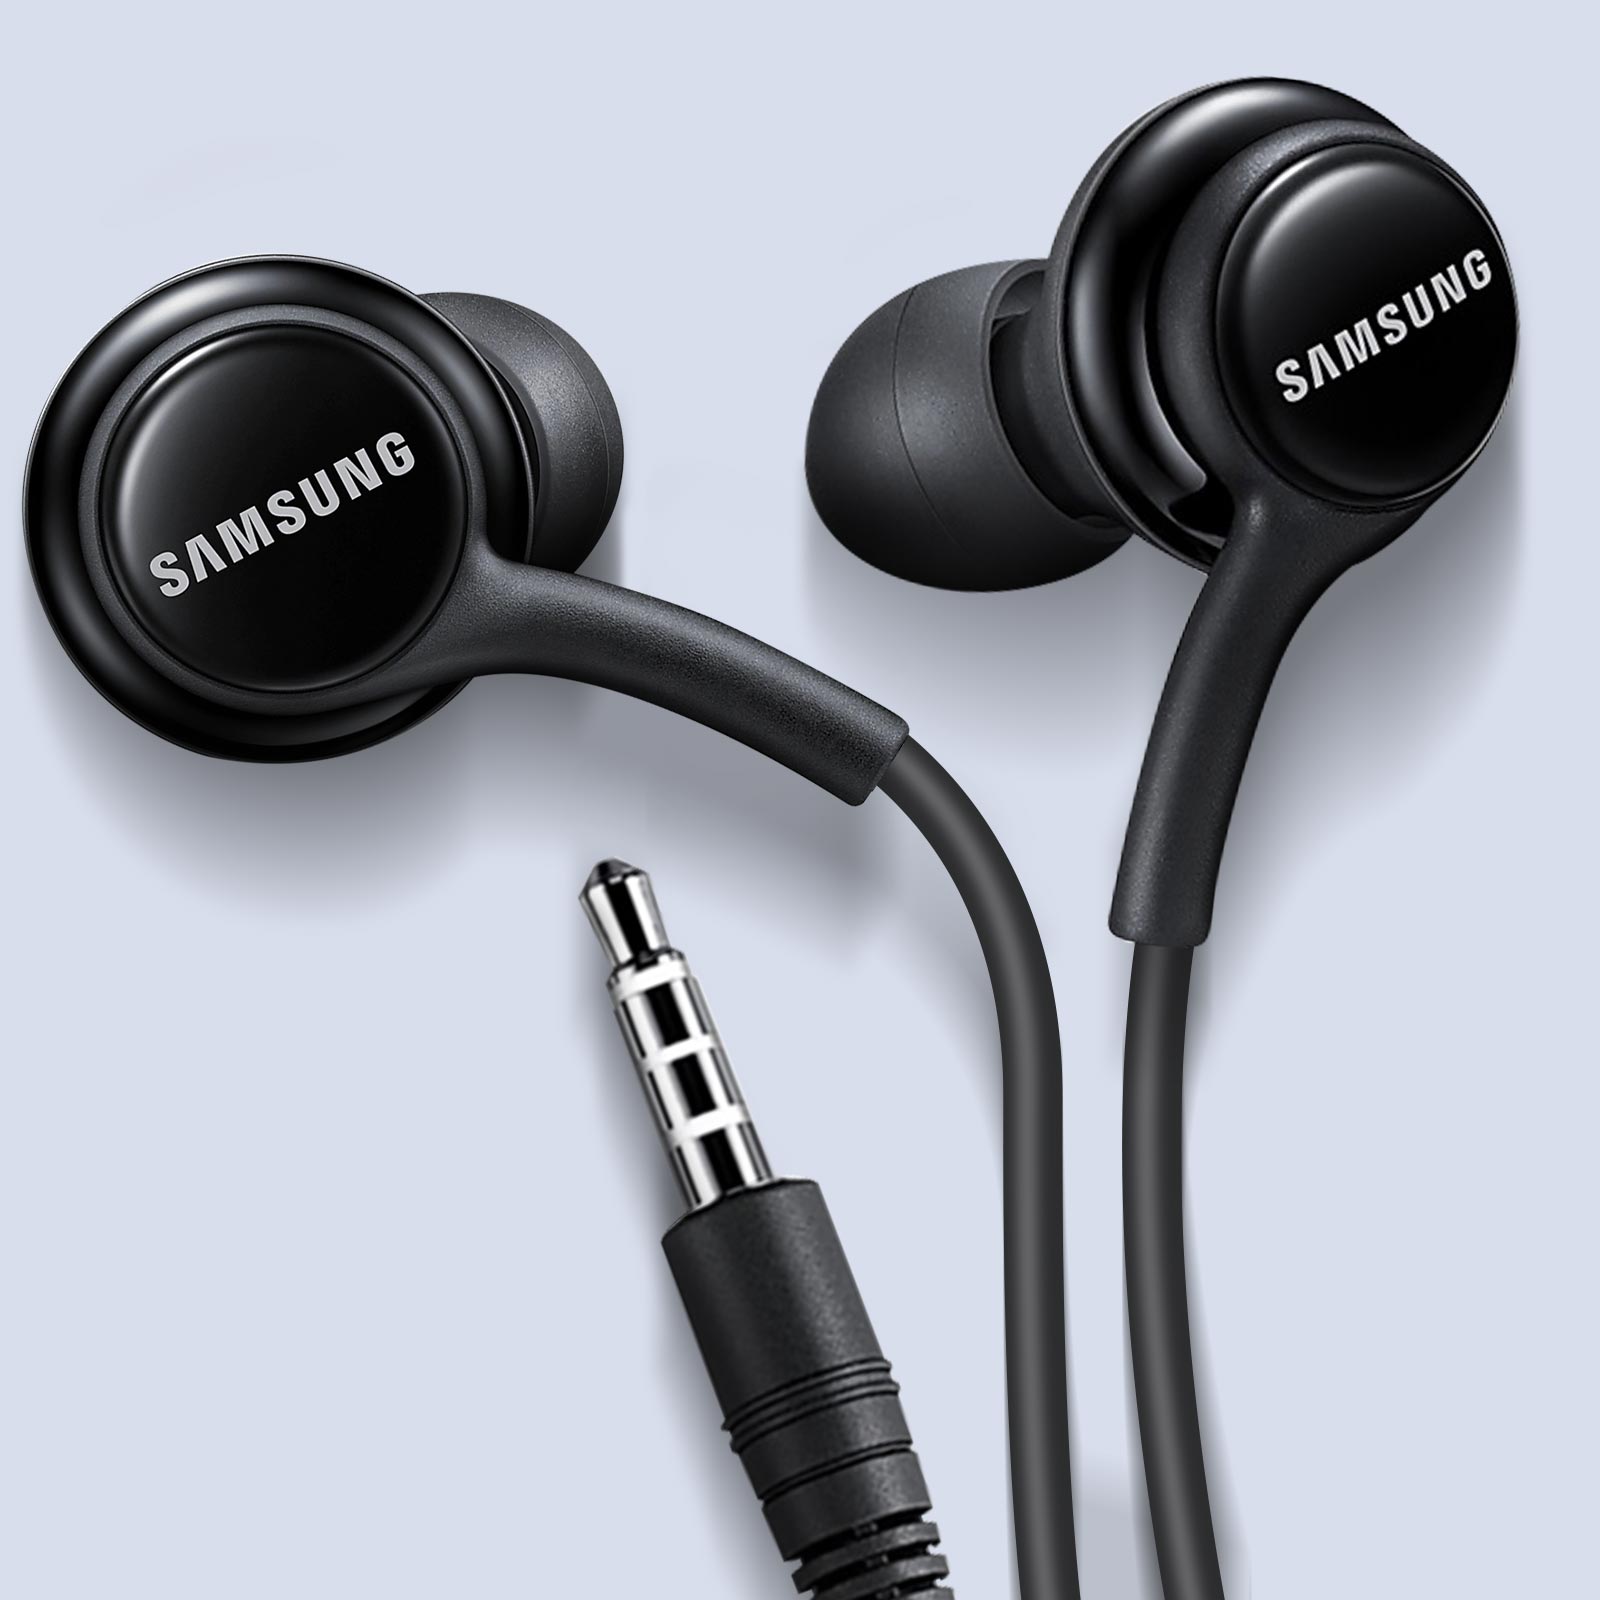 Ecouteurs Samsung Filaires d'Origine, Jack 3.5 Stereo In-Ear intra